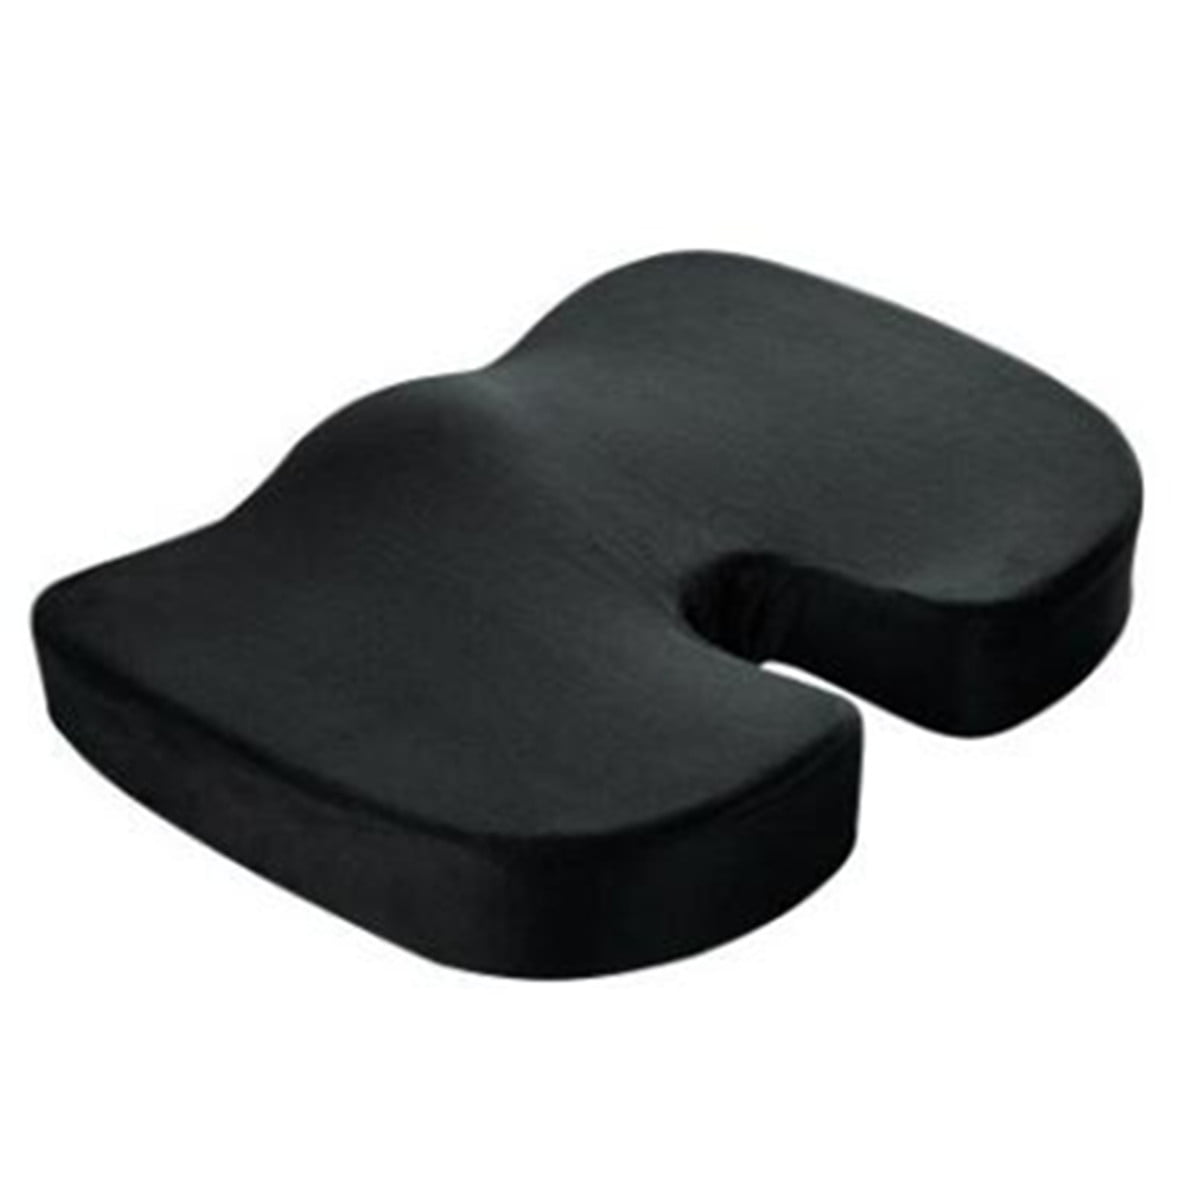 Seat Cushion Pillow For Office Chair Or Car 100 Memory Foam Firm